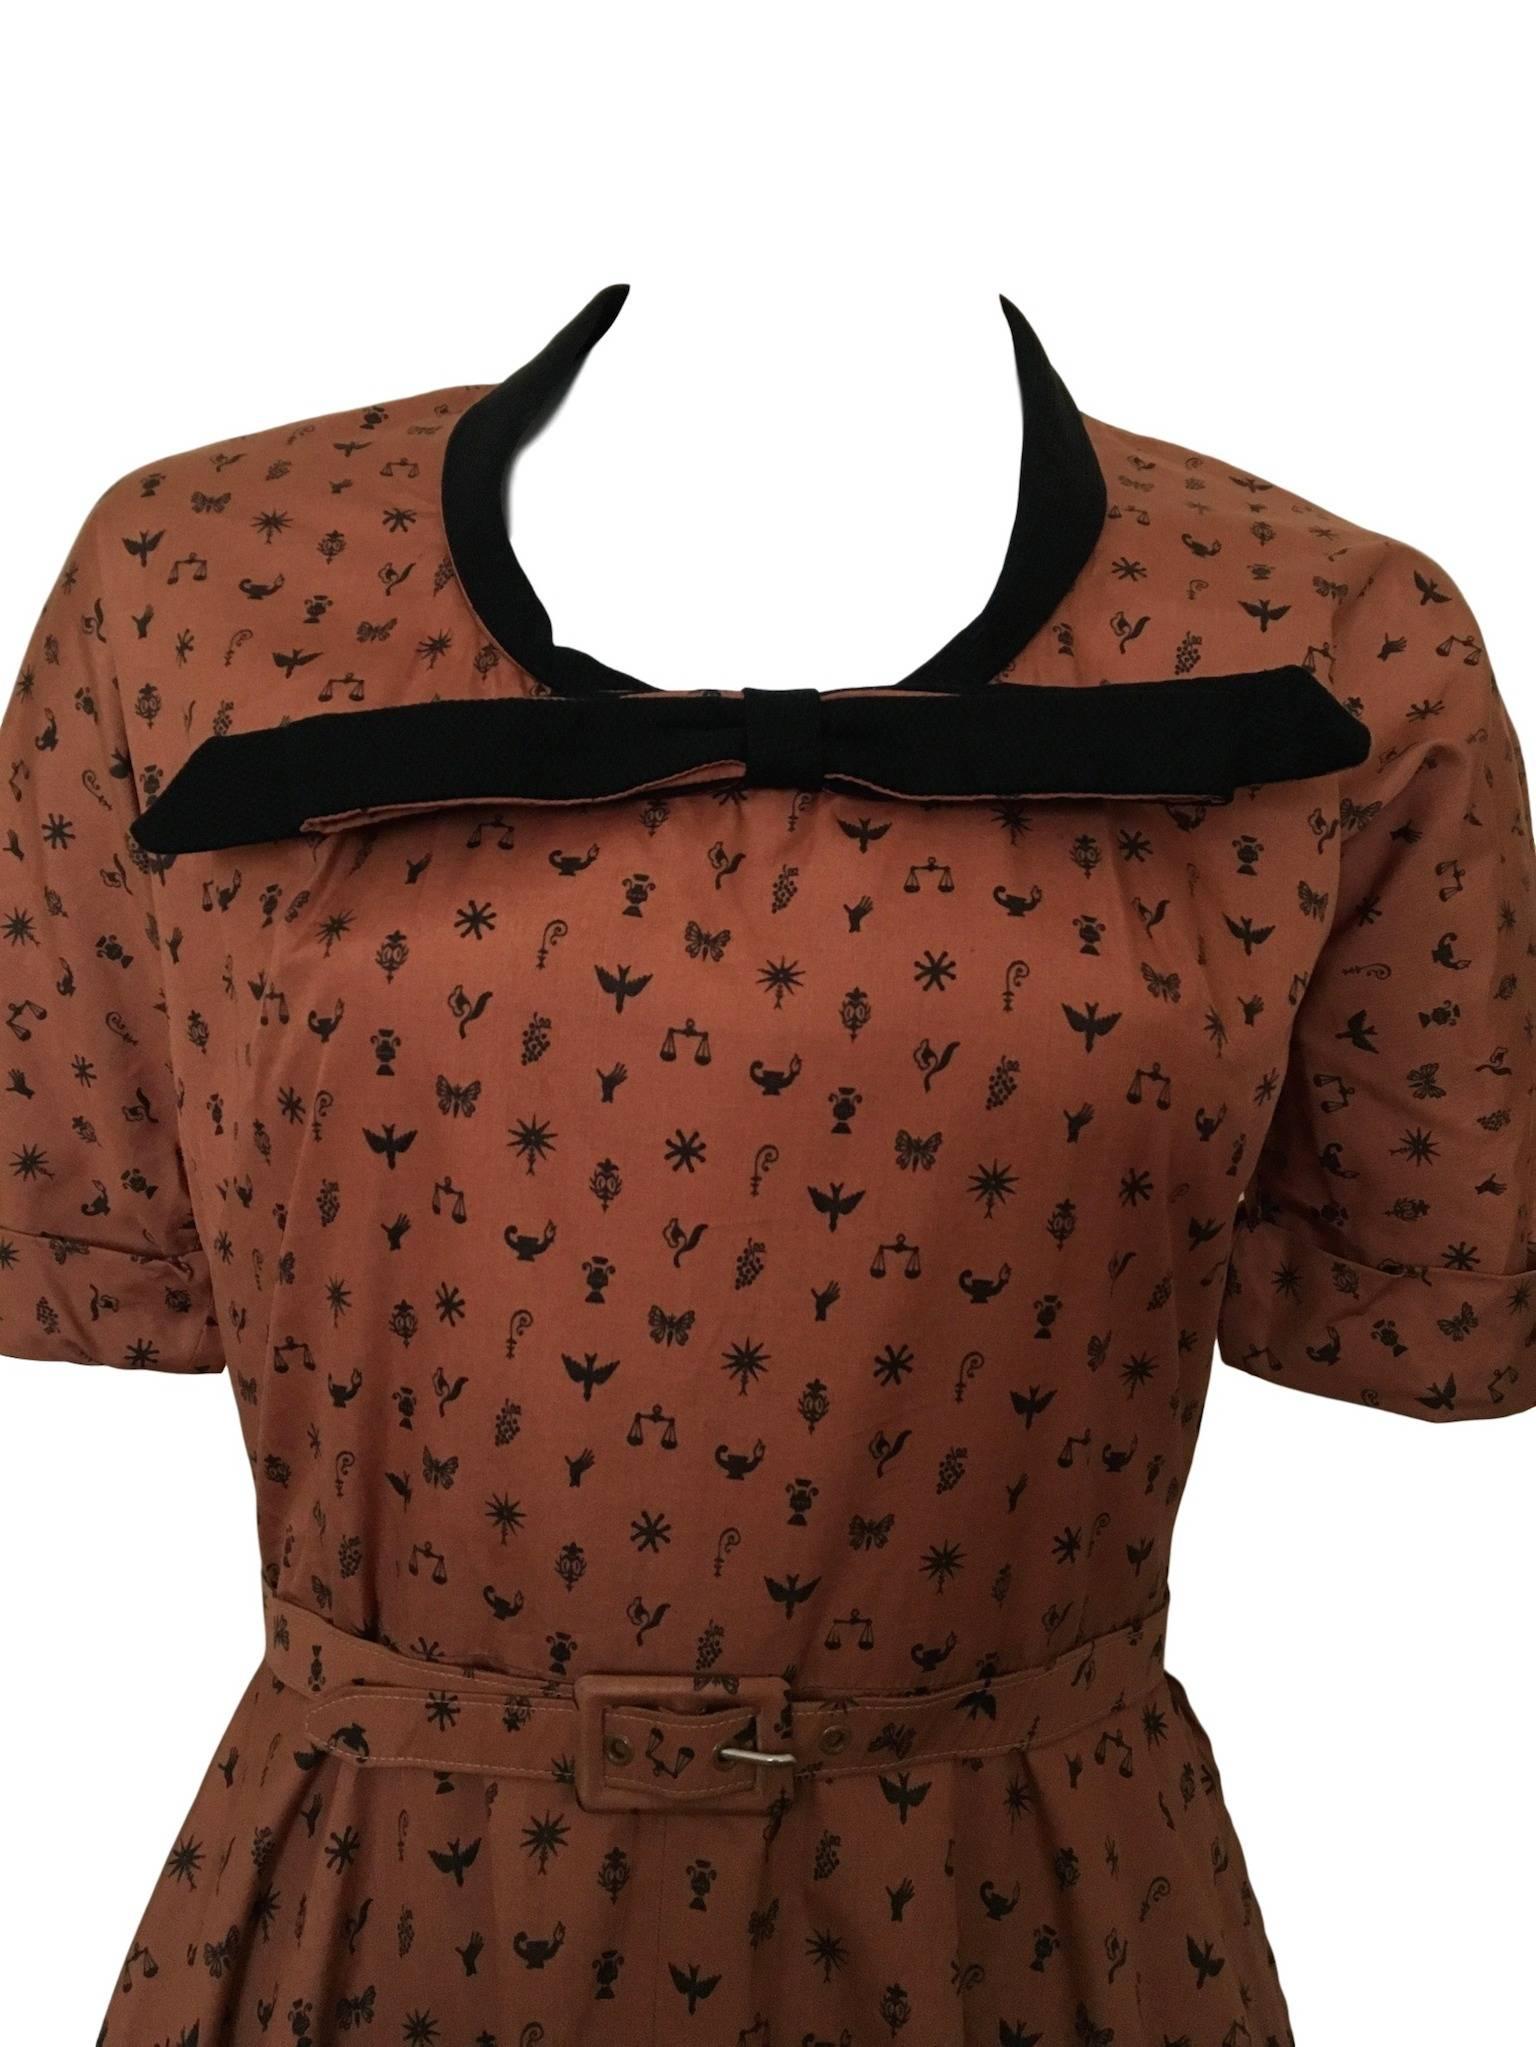 Superb Vintage 1950s Horrockses Cotton Novelty Print Dress Zodiac 10 36 In Excellent Condition In Portsmouth, Hampshire